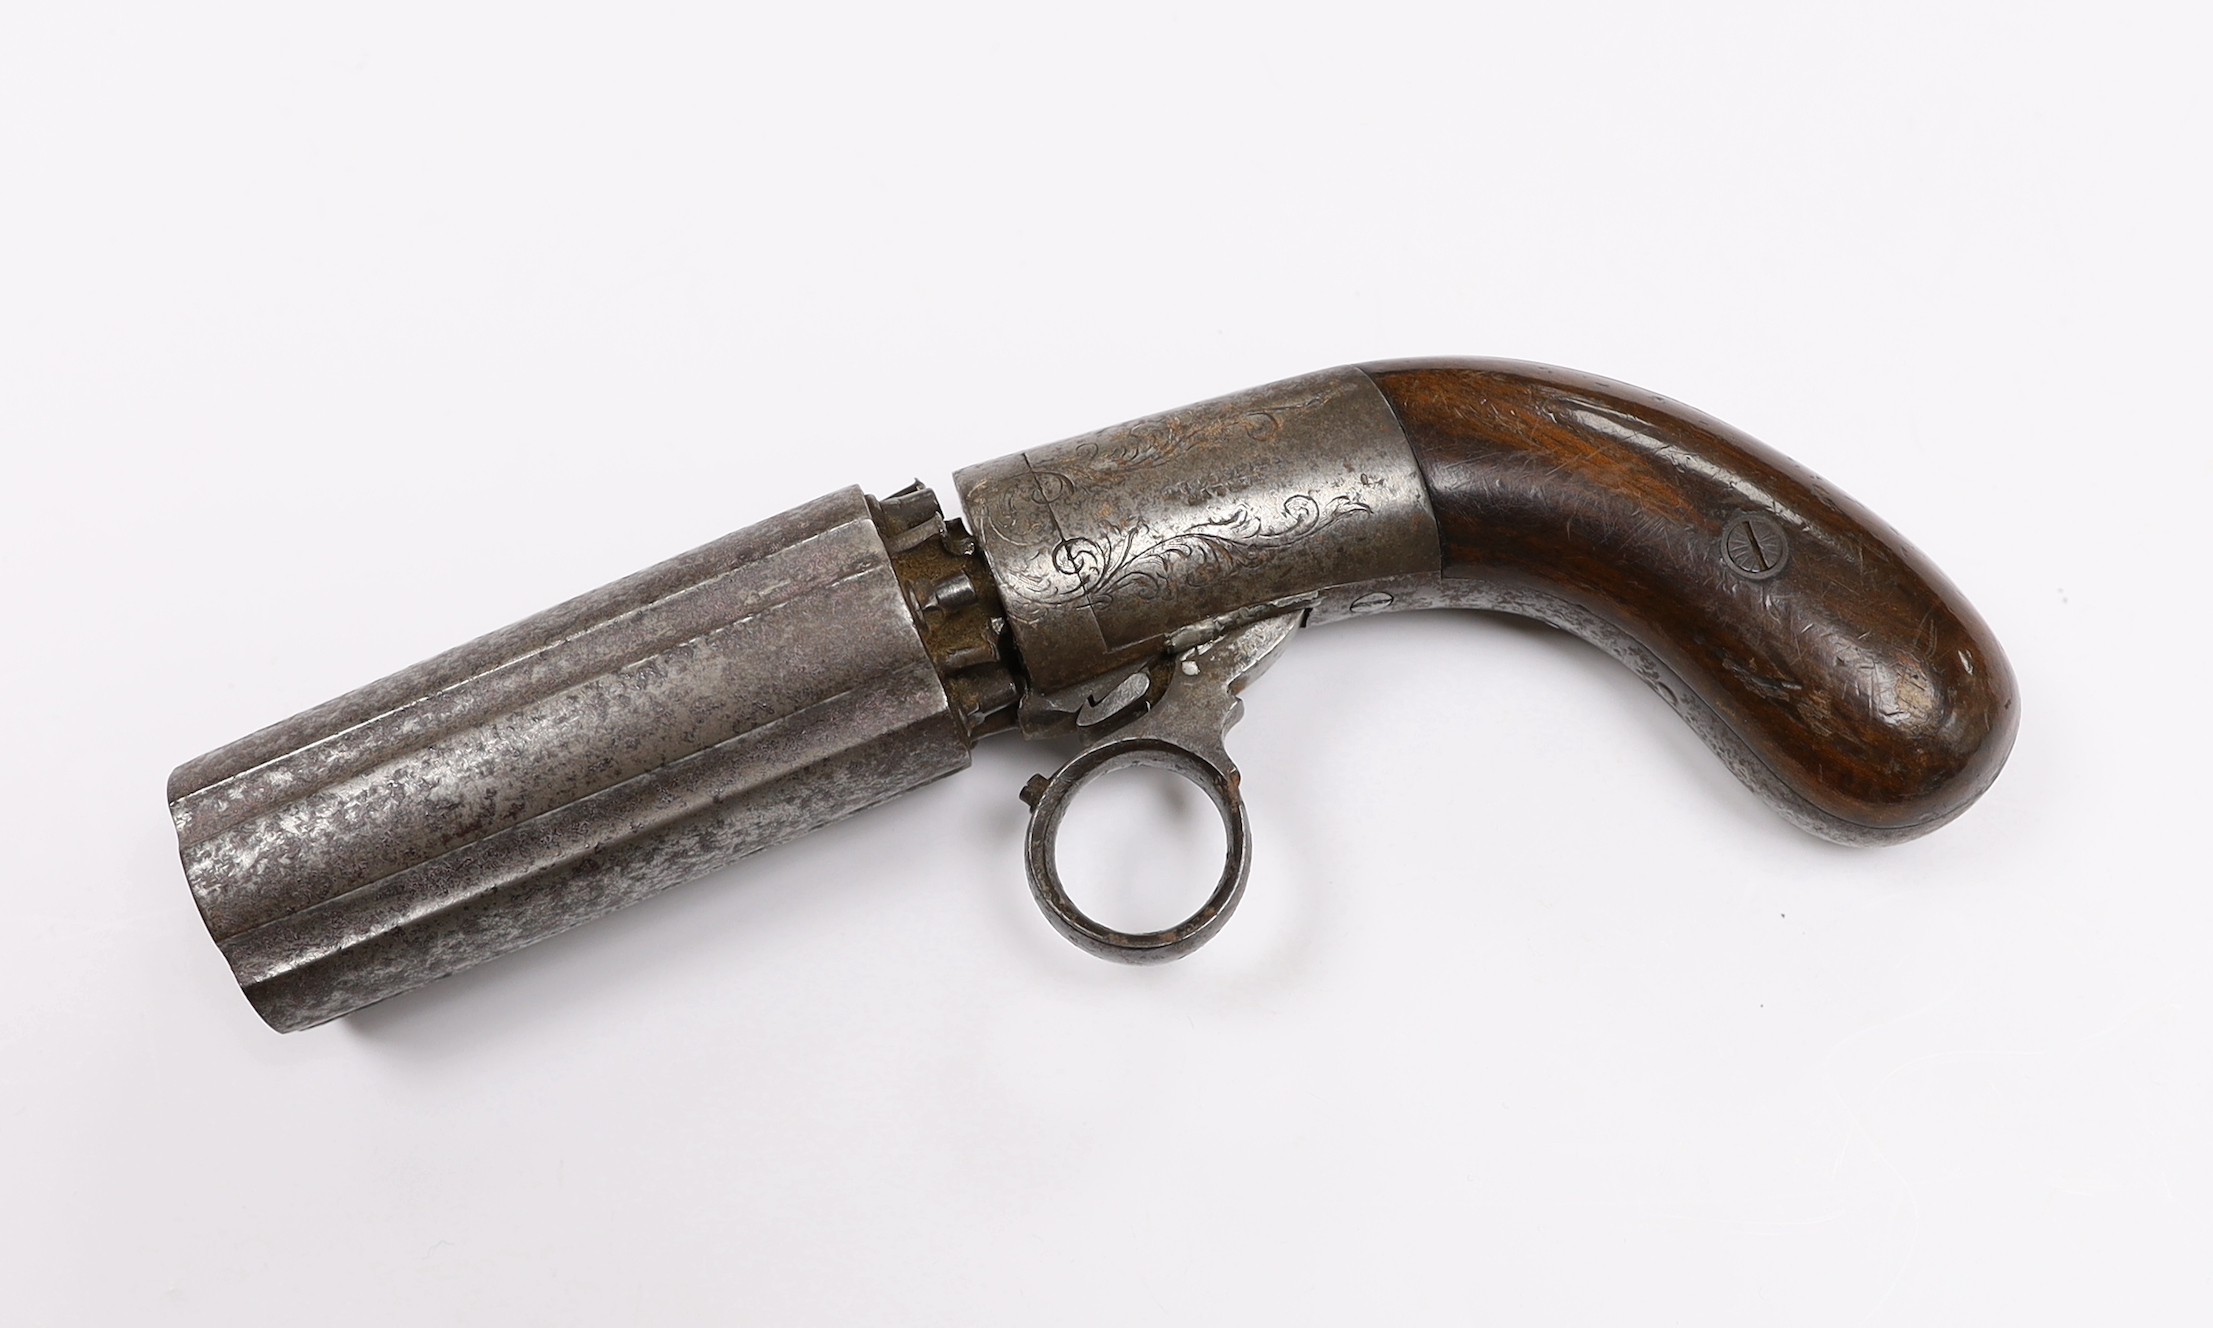 A 19th century, six barrel under action percussion pistol, with engraved lock and walnut grip, stamped ‘Coopers patent’, barrel 8.6cm